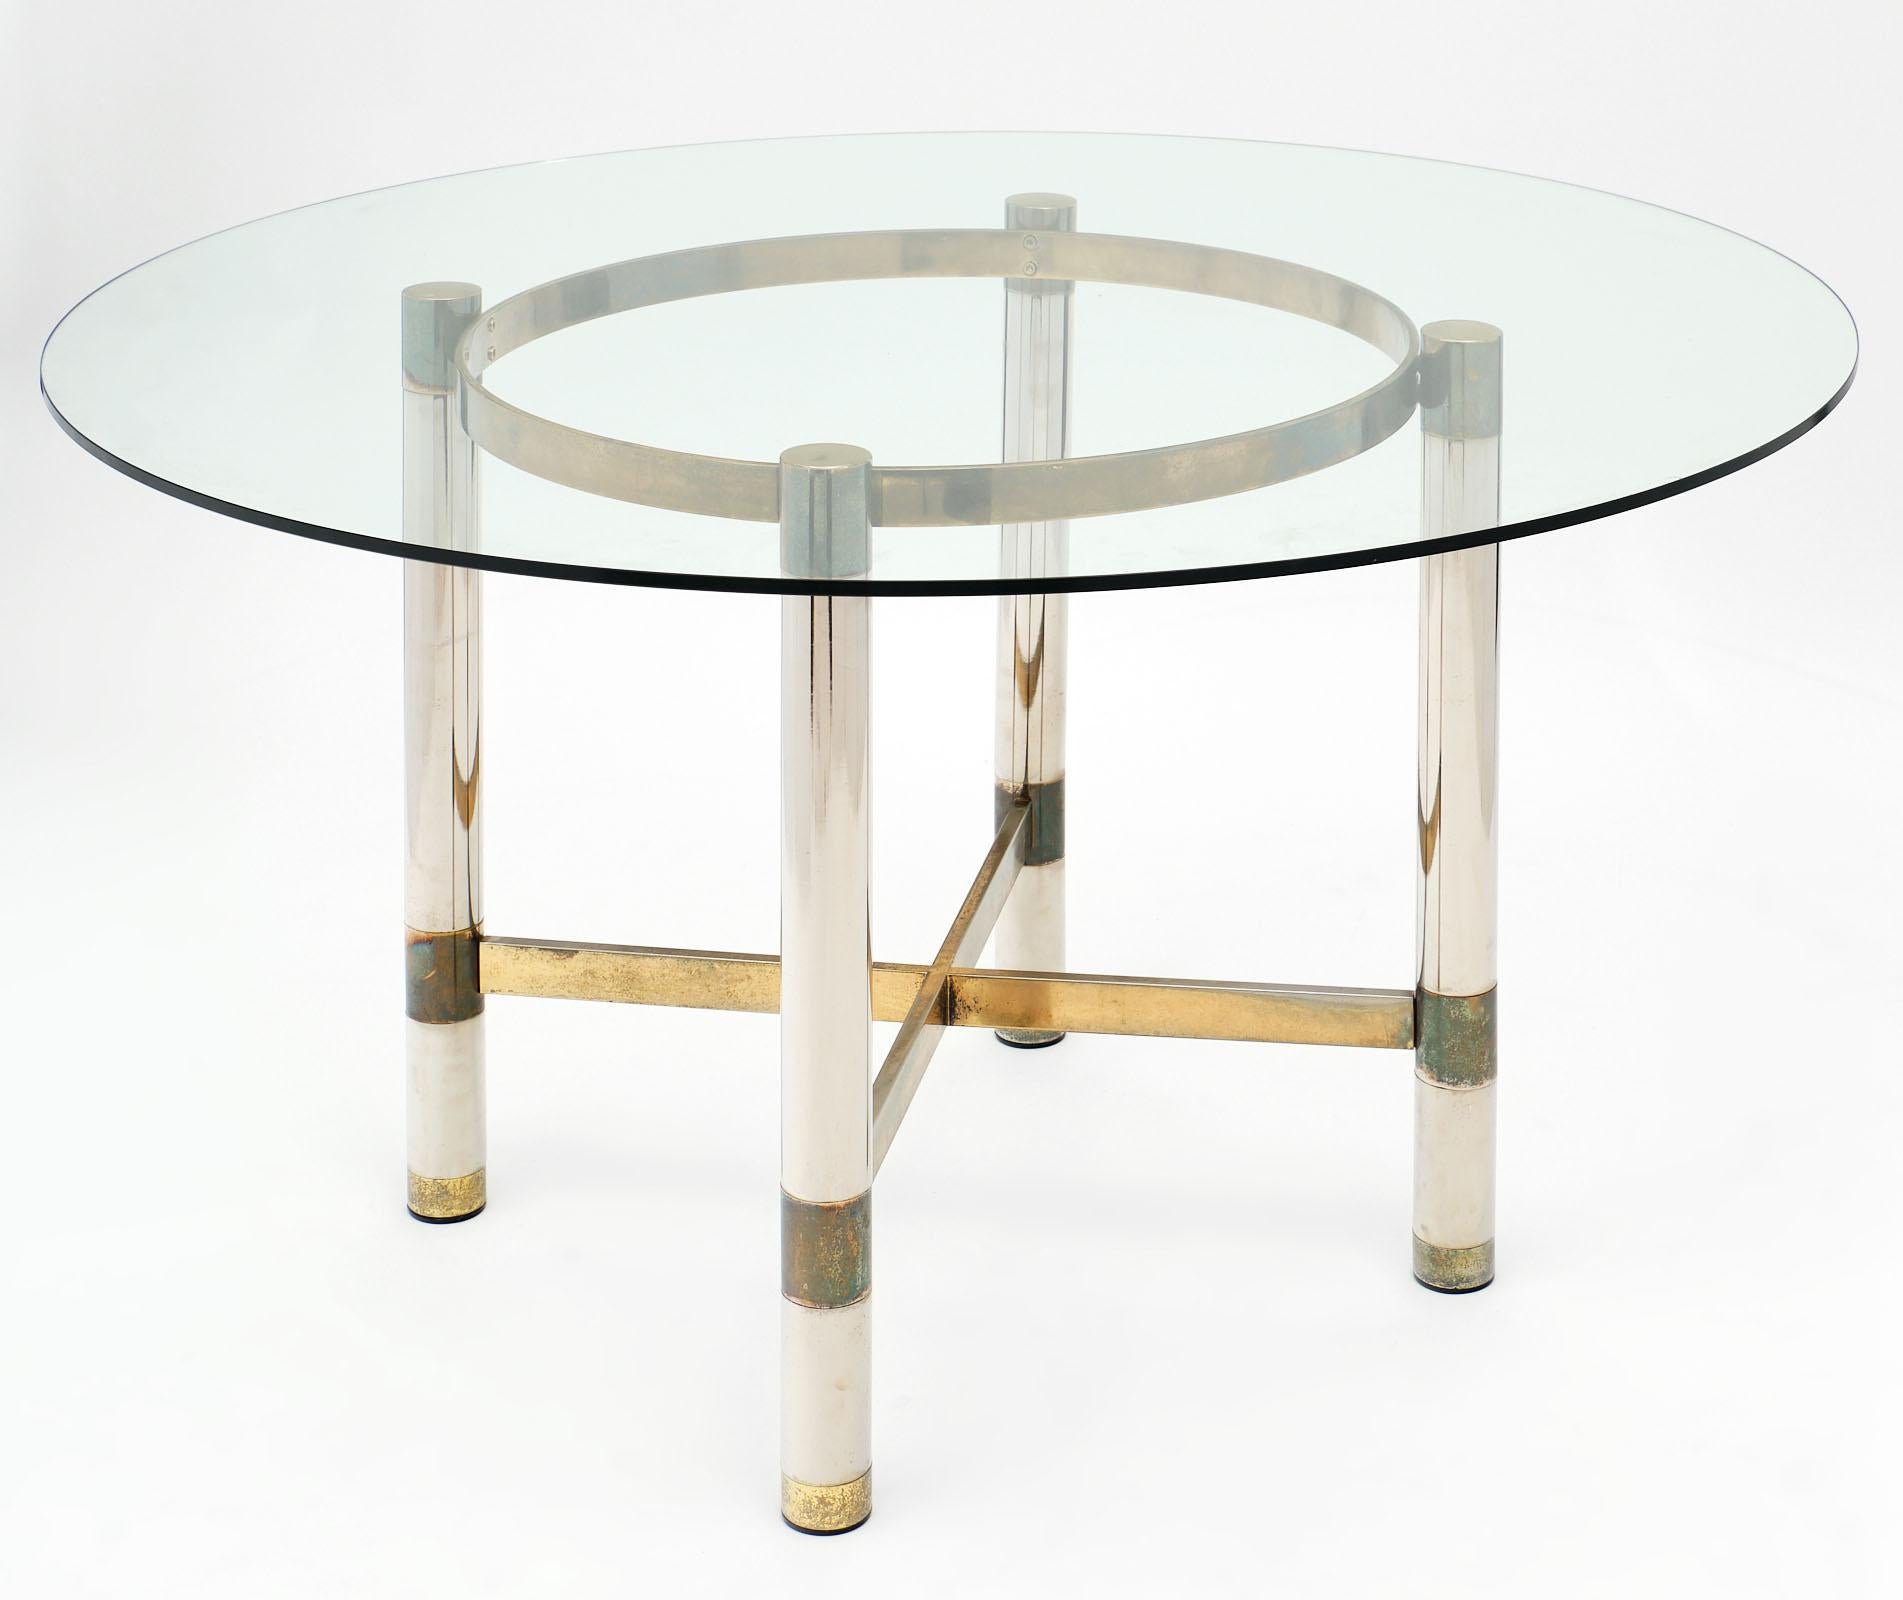 French modernist dining set. The table base is made of brass and chrome with a circular glass top. The chairs are upholstered with the original vinyl and feature Lucite on the backs of the chairs. We love the eye-catching details of this set. The